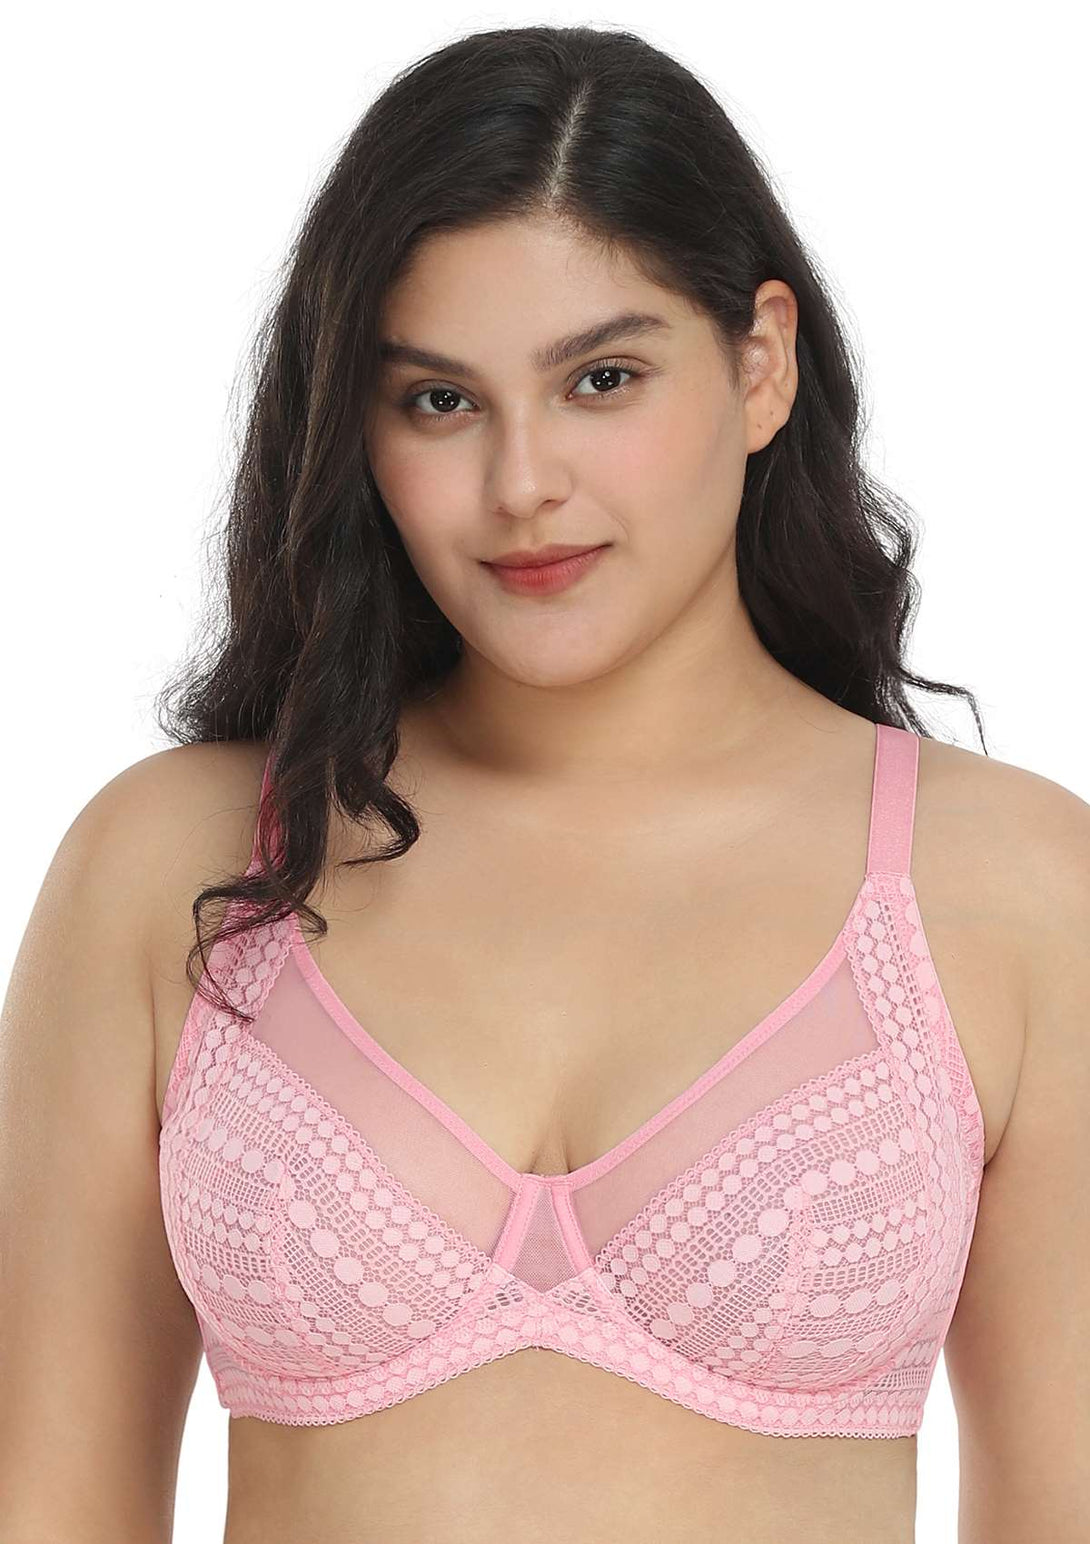 HSIA HSIA Polka Dot Sexy Lace Unlined Bra Pink / 34 / C